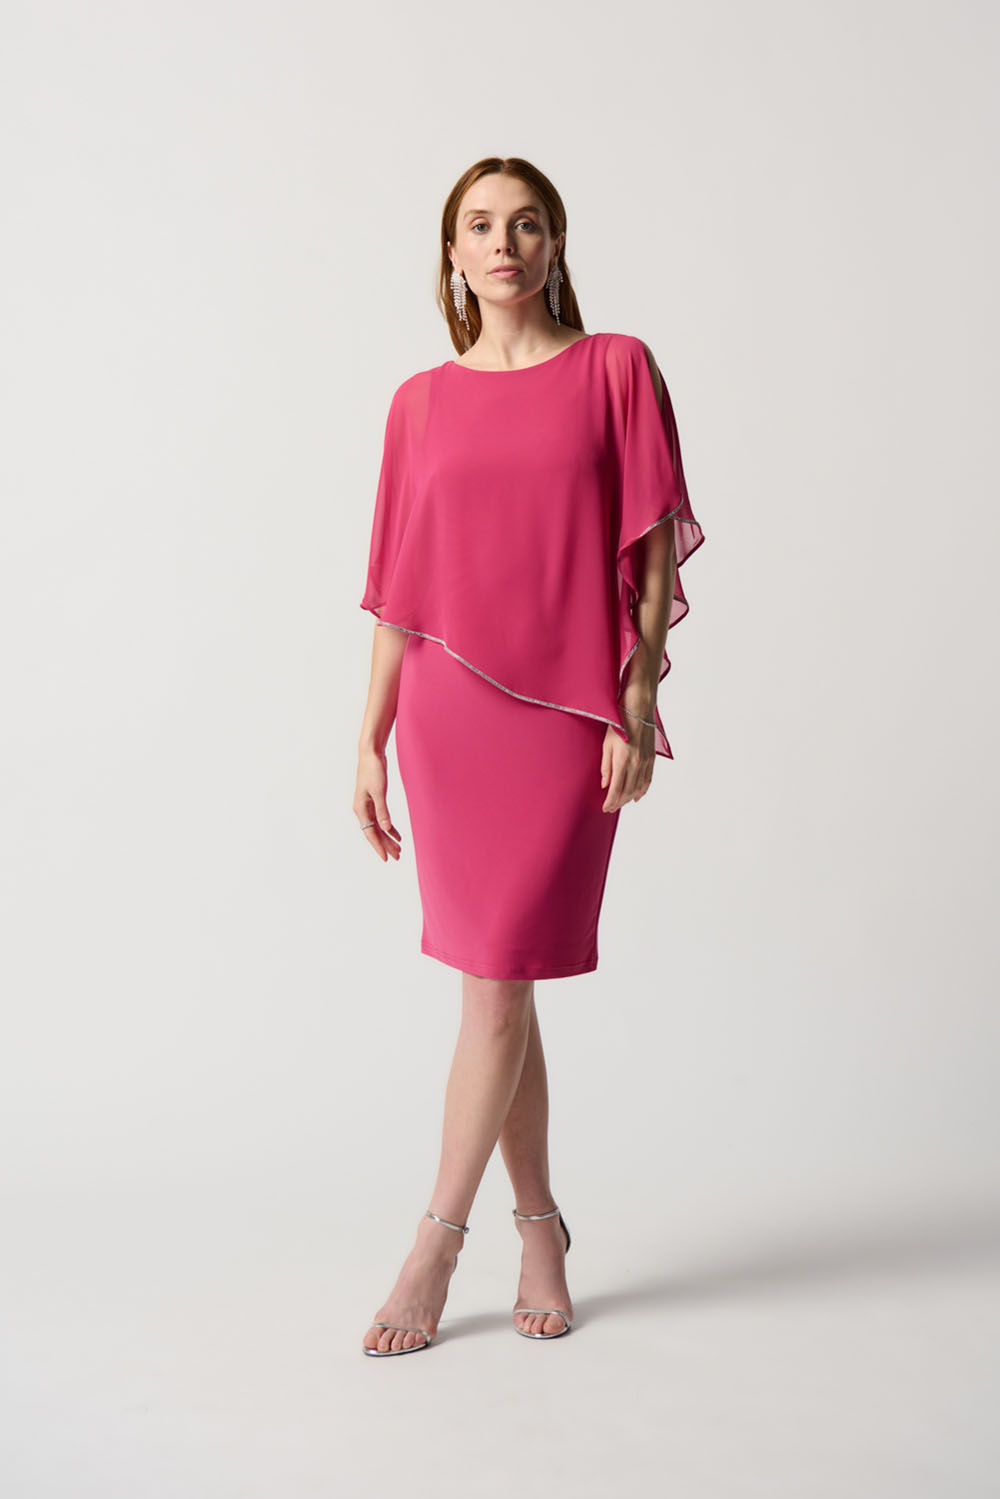 Joseph Ribkoff Layered Dress in Navy Cobalt or Pink - Runway Boutique